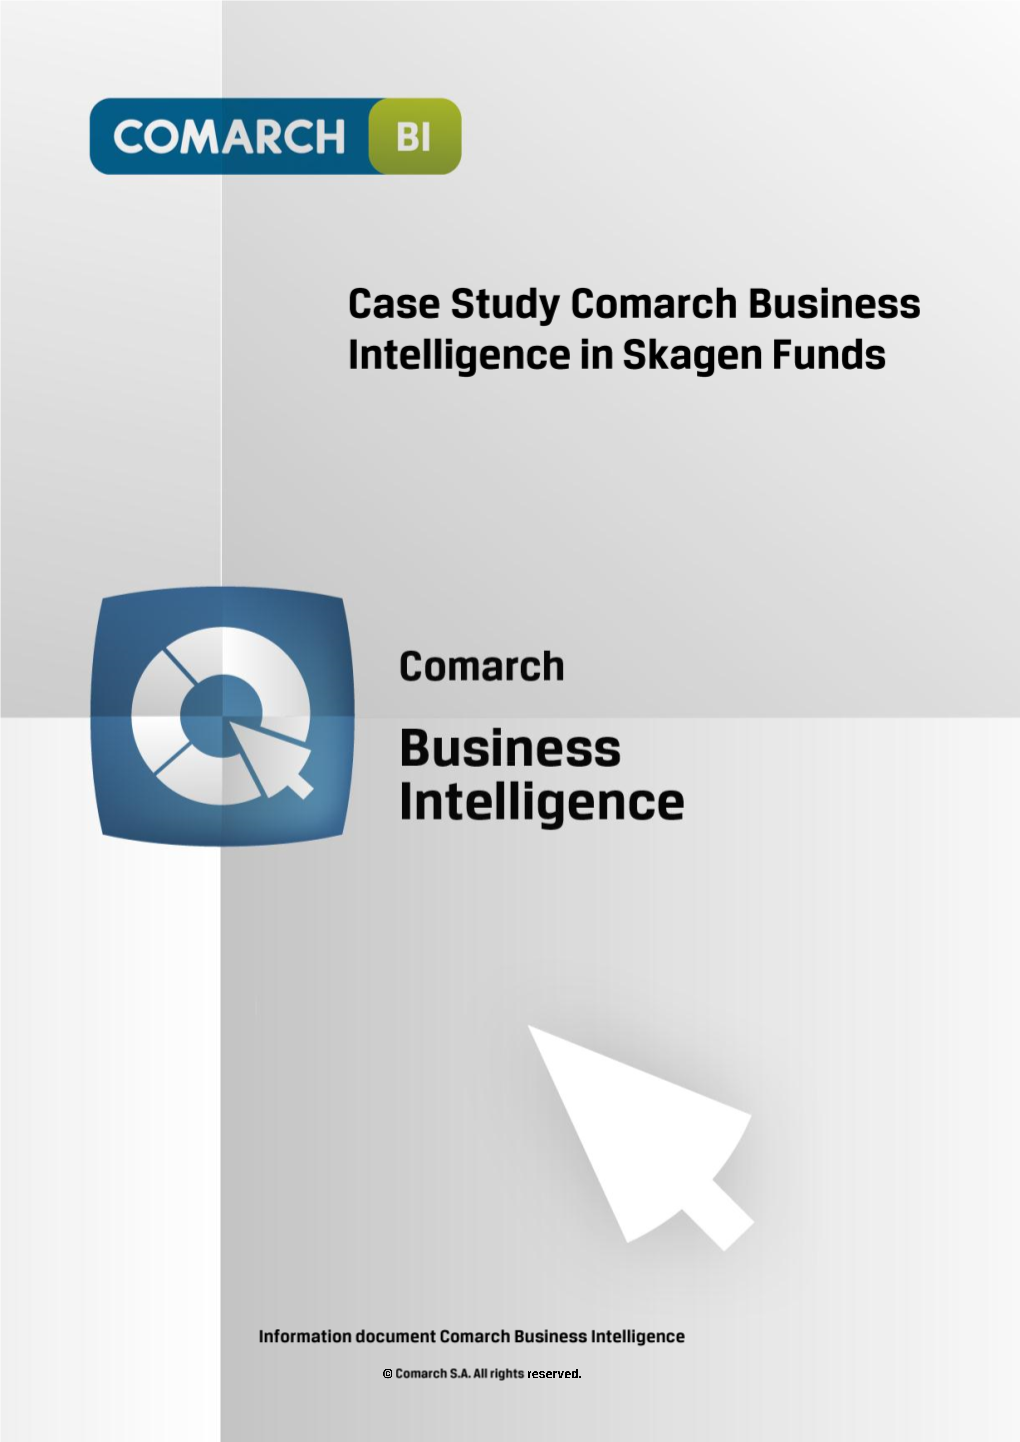 Case Study Comarch Business Intelligence in Skagen Funds